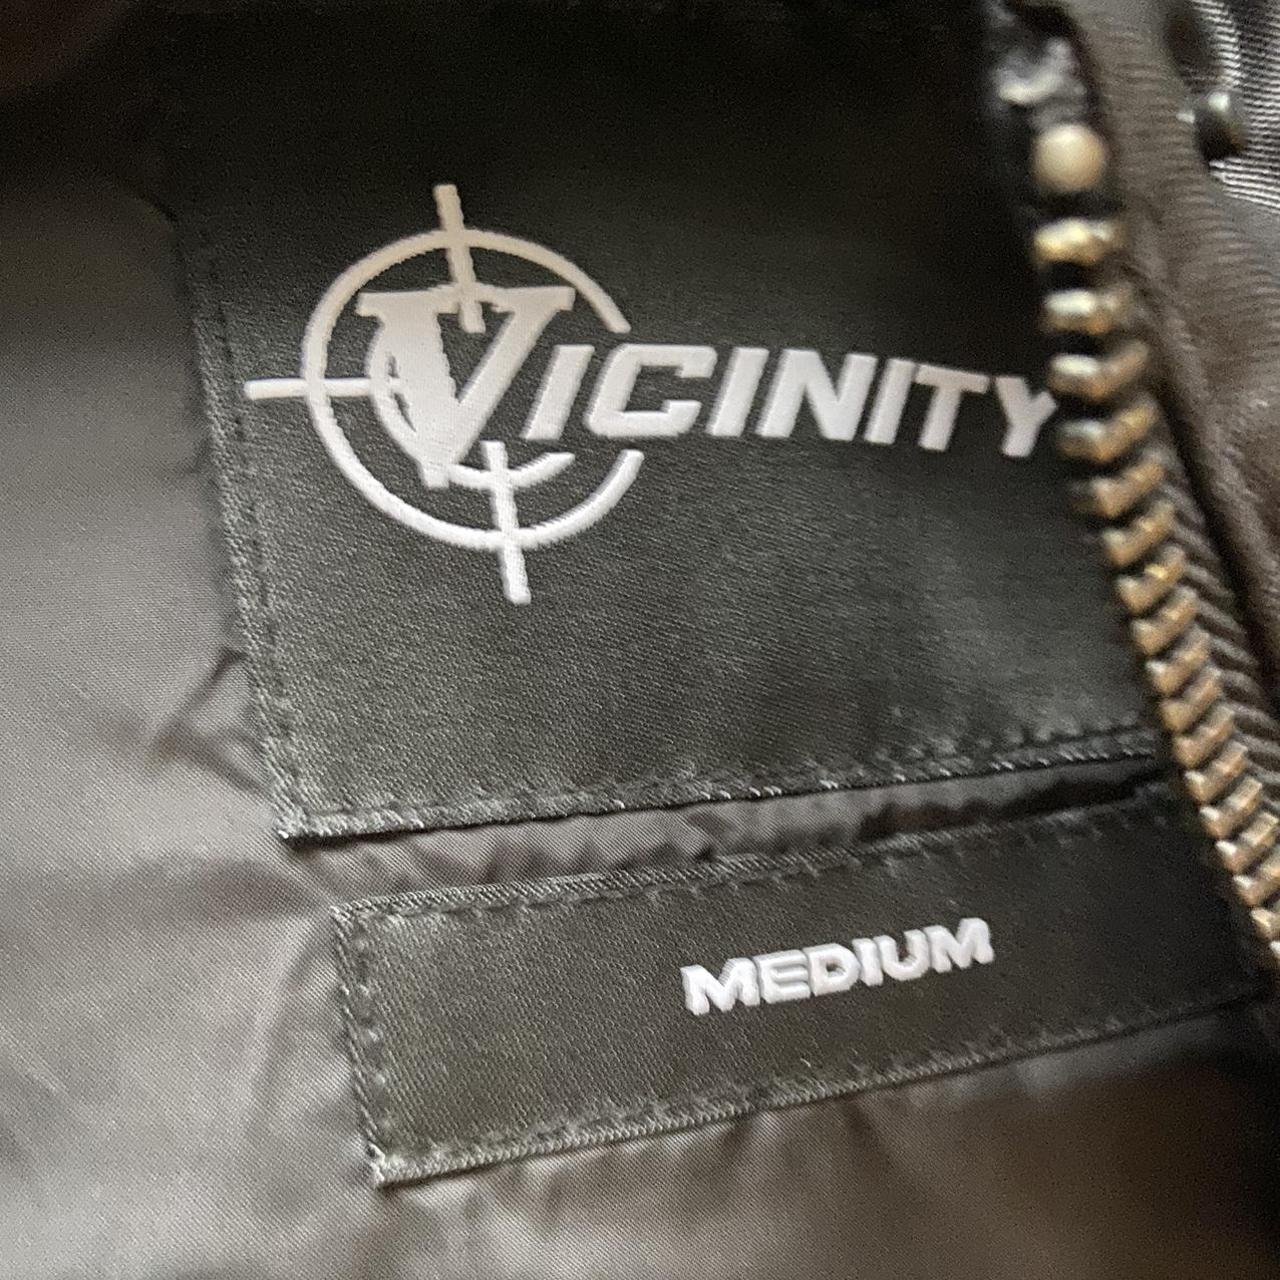 VICINITY PUFFER BLACK SOLD OUT - SIZE M... - Depop